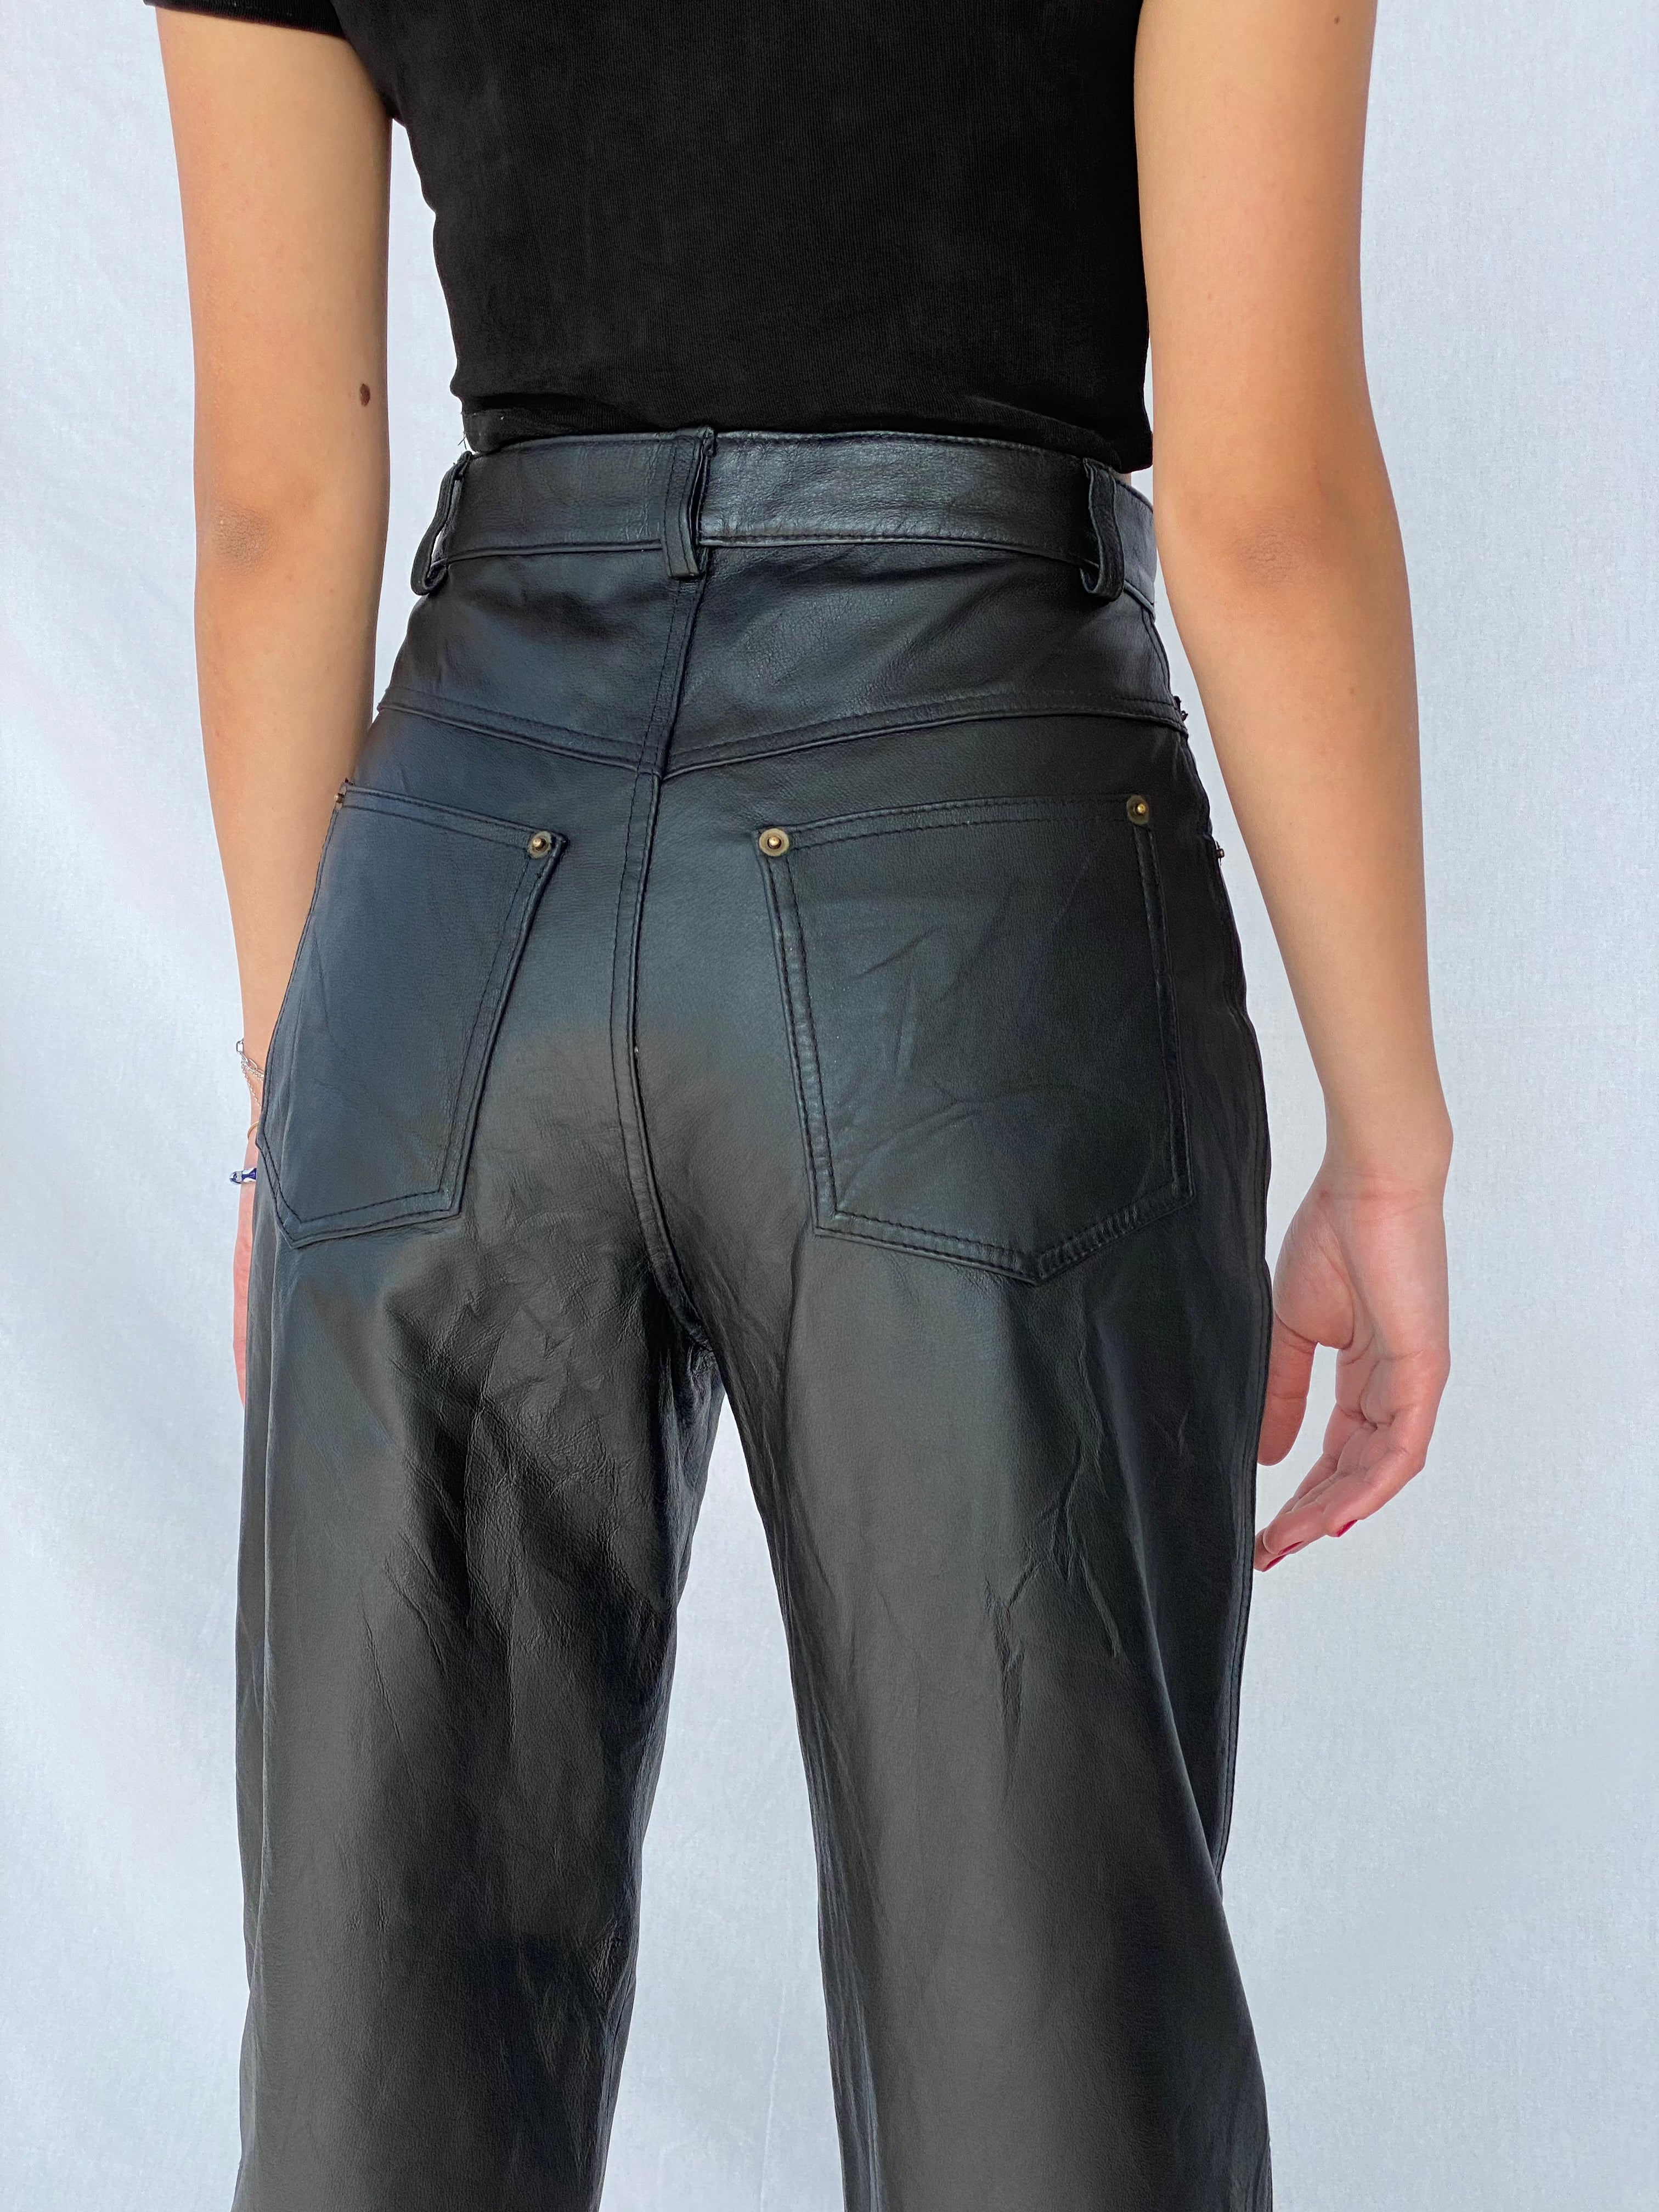 Authentic Clothing Company Leather Pants - Balagan Vintage Leather Pants 90s, black leather, genuine leather, leather, vintage